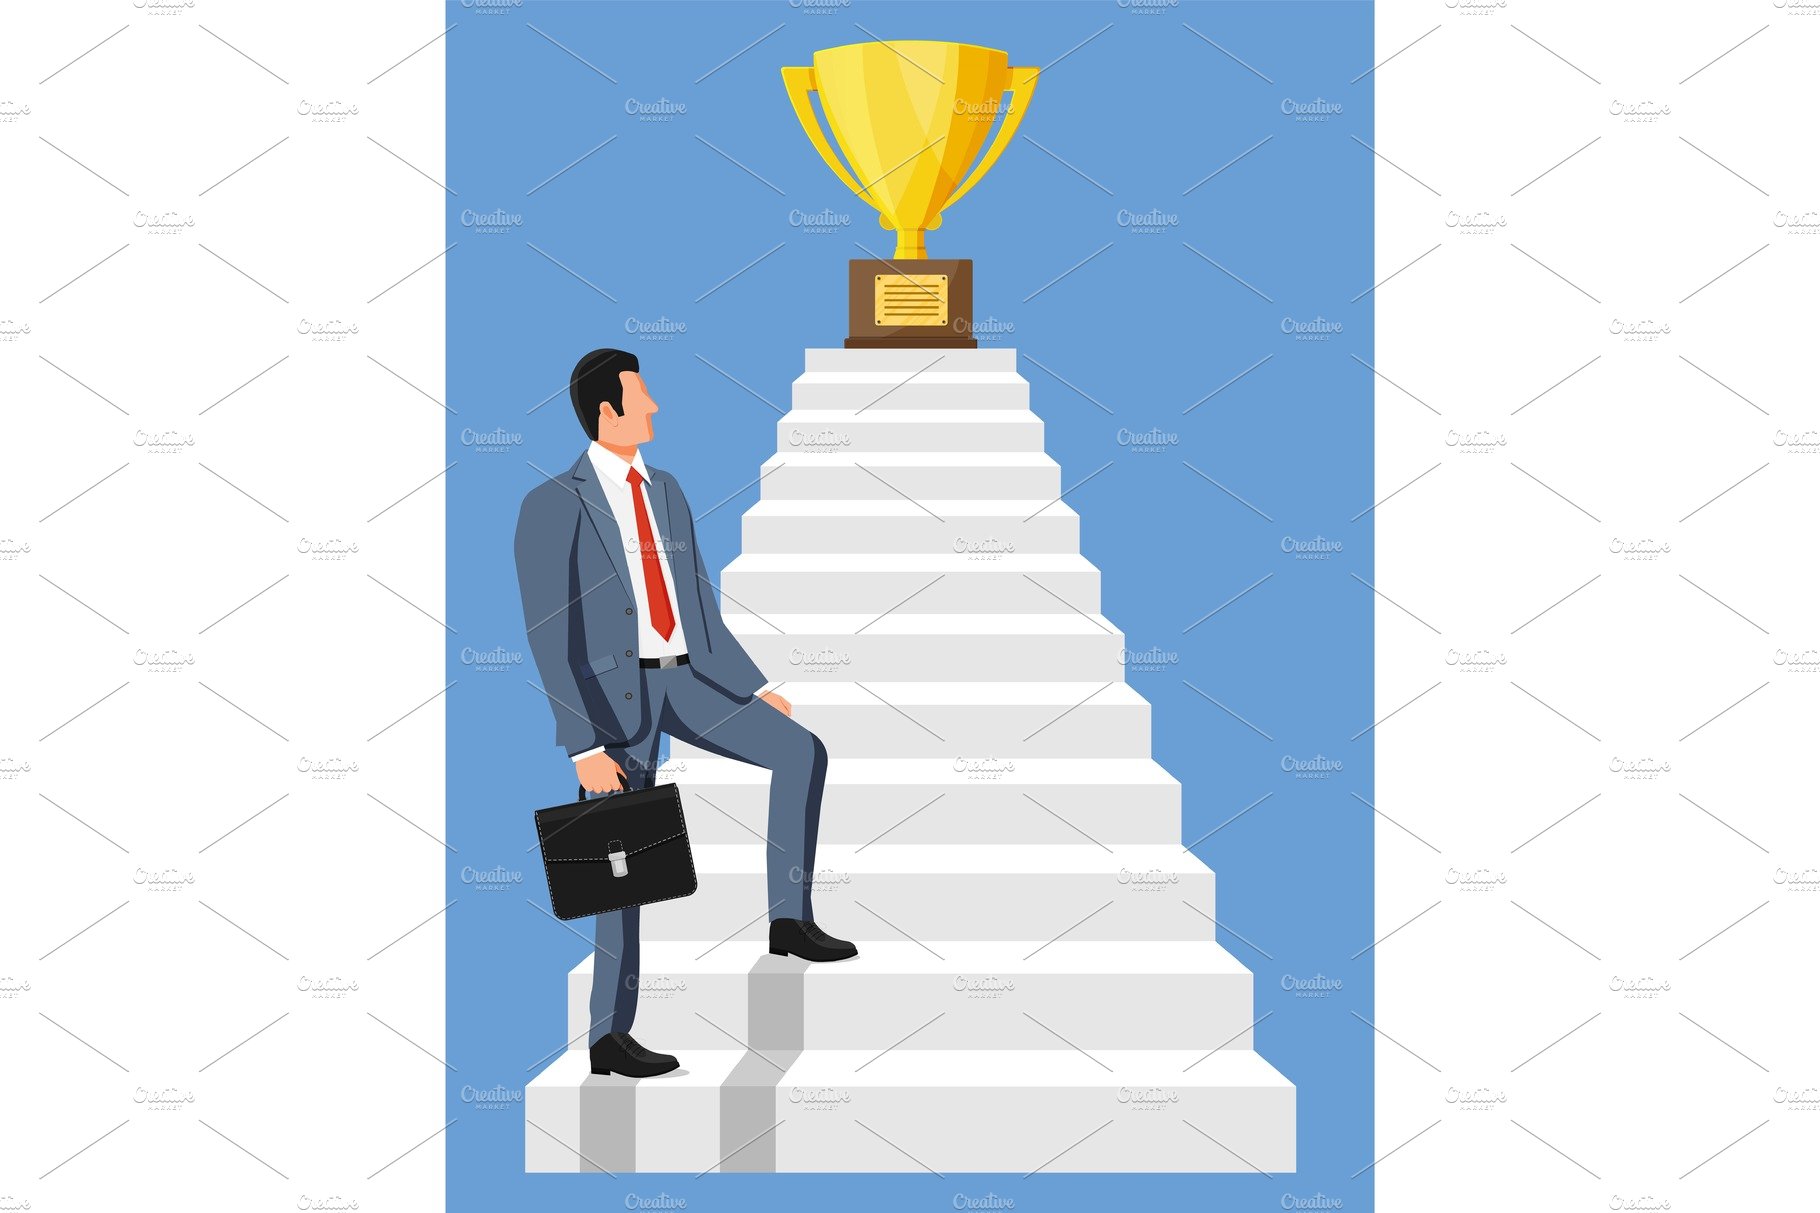 Businessman and gold trophy on cover image.